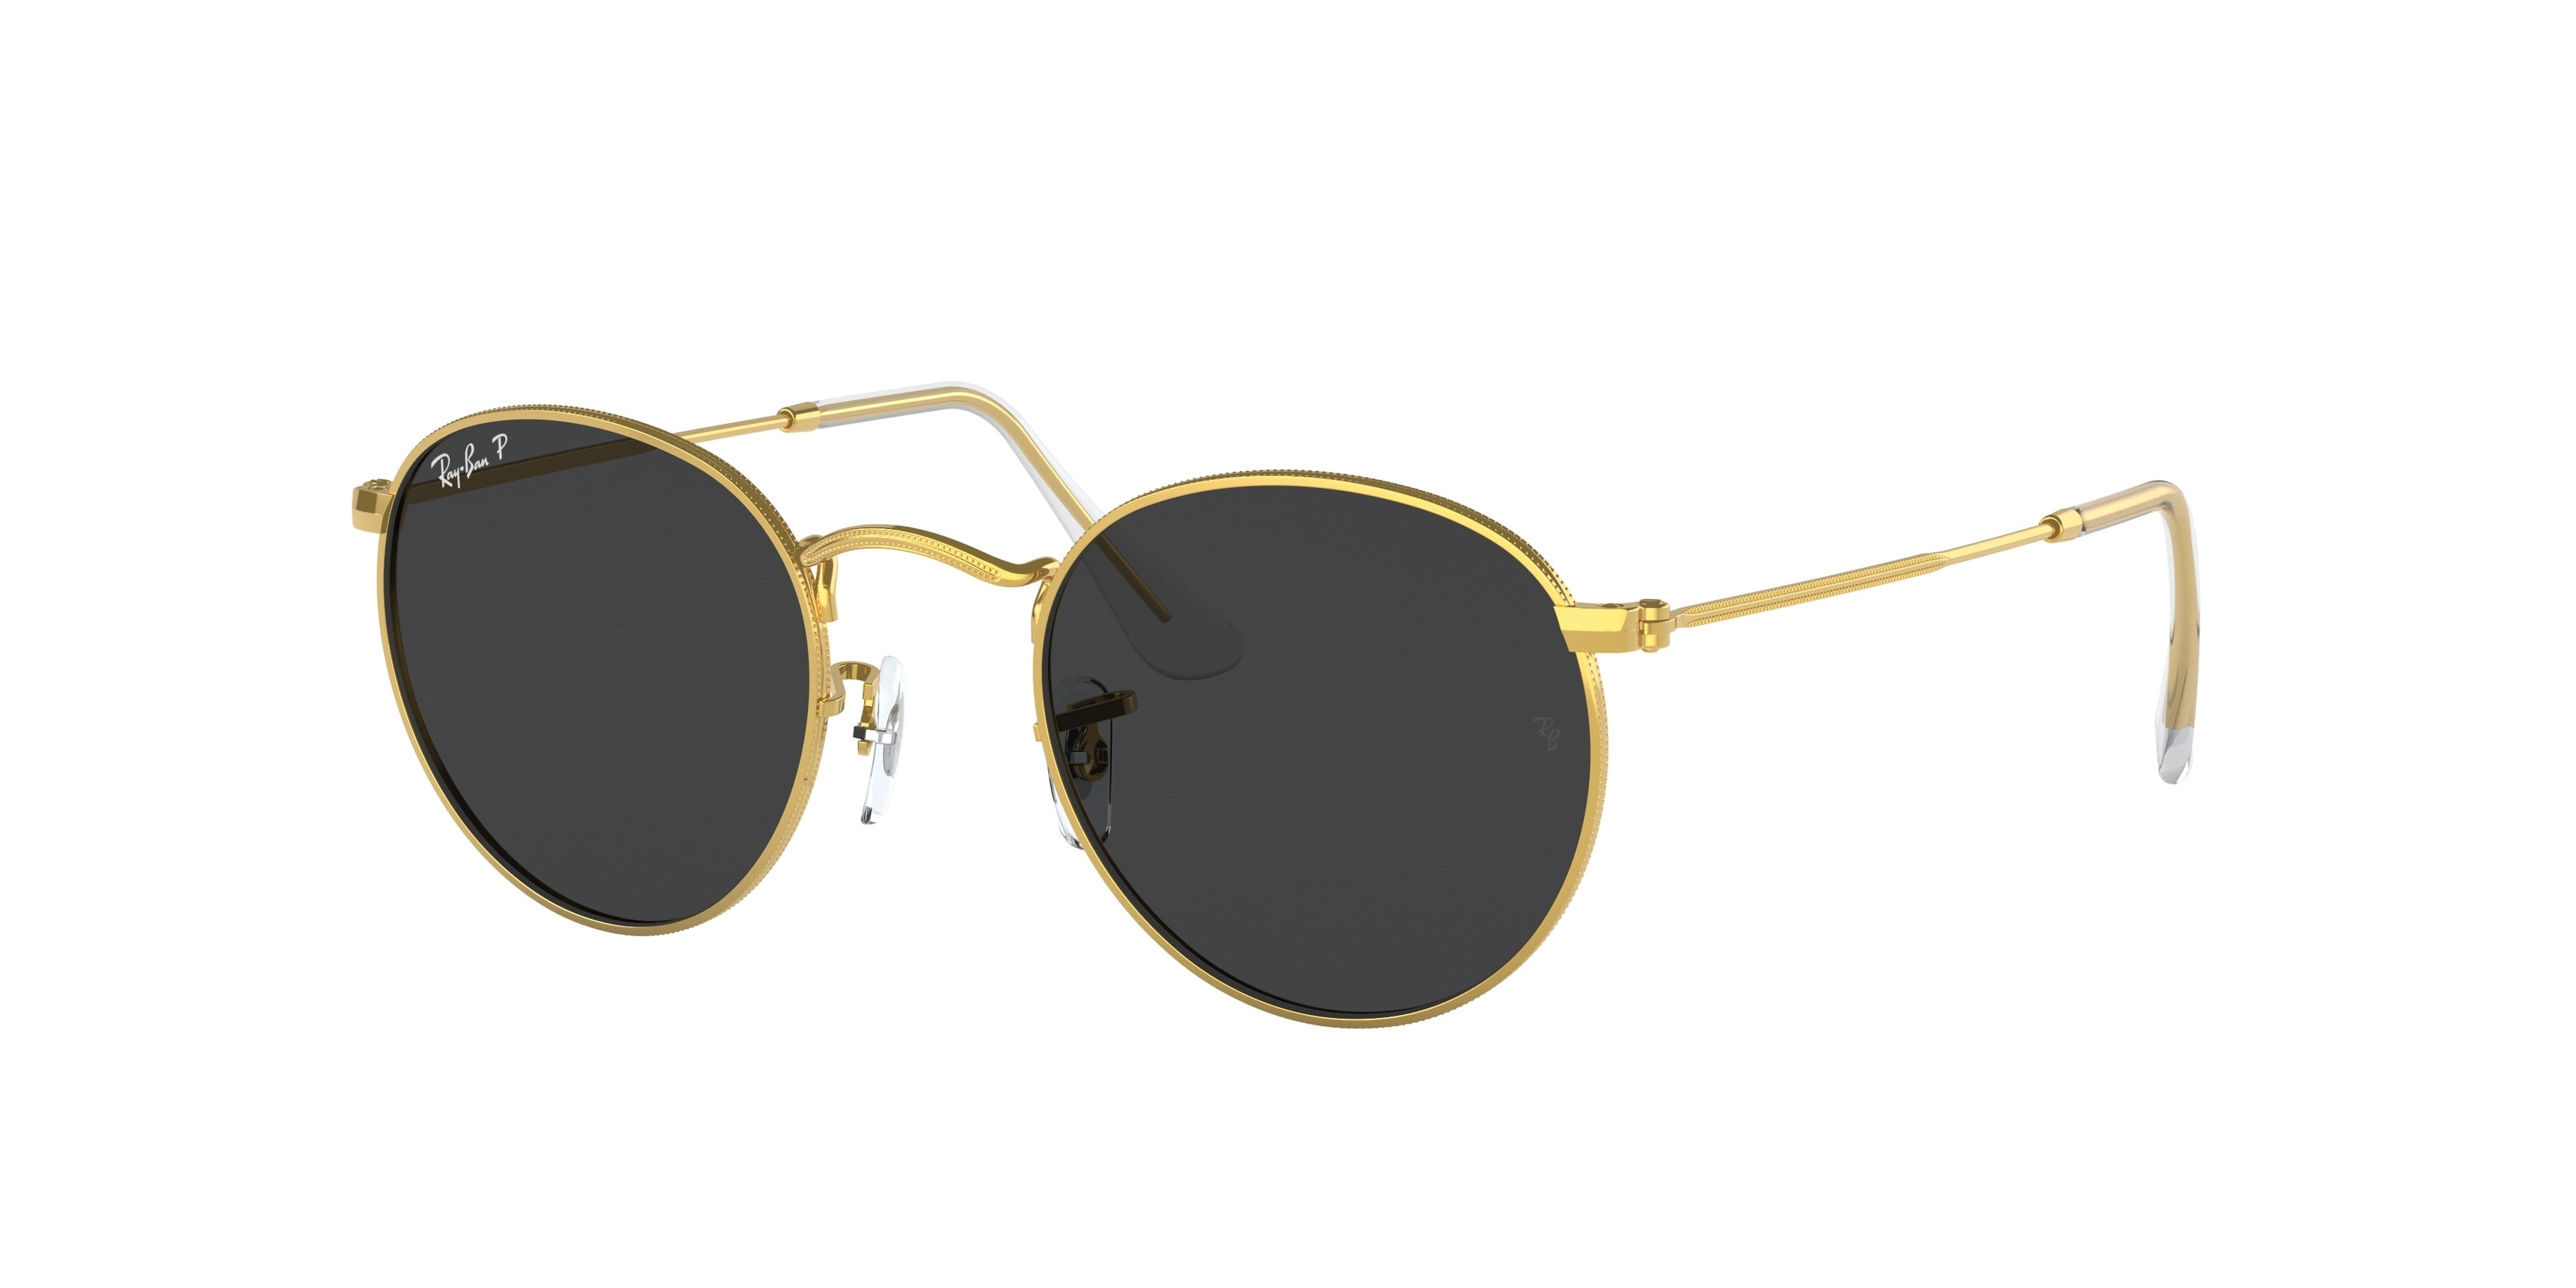 Ray-Ban ROUND METAL RB3447 Round Sunglasses  919648-Gold 52-145-21 - Color Map Gold